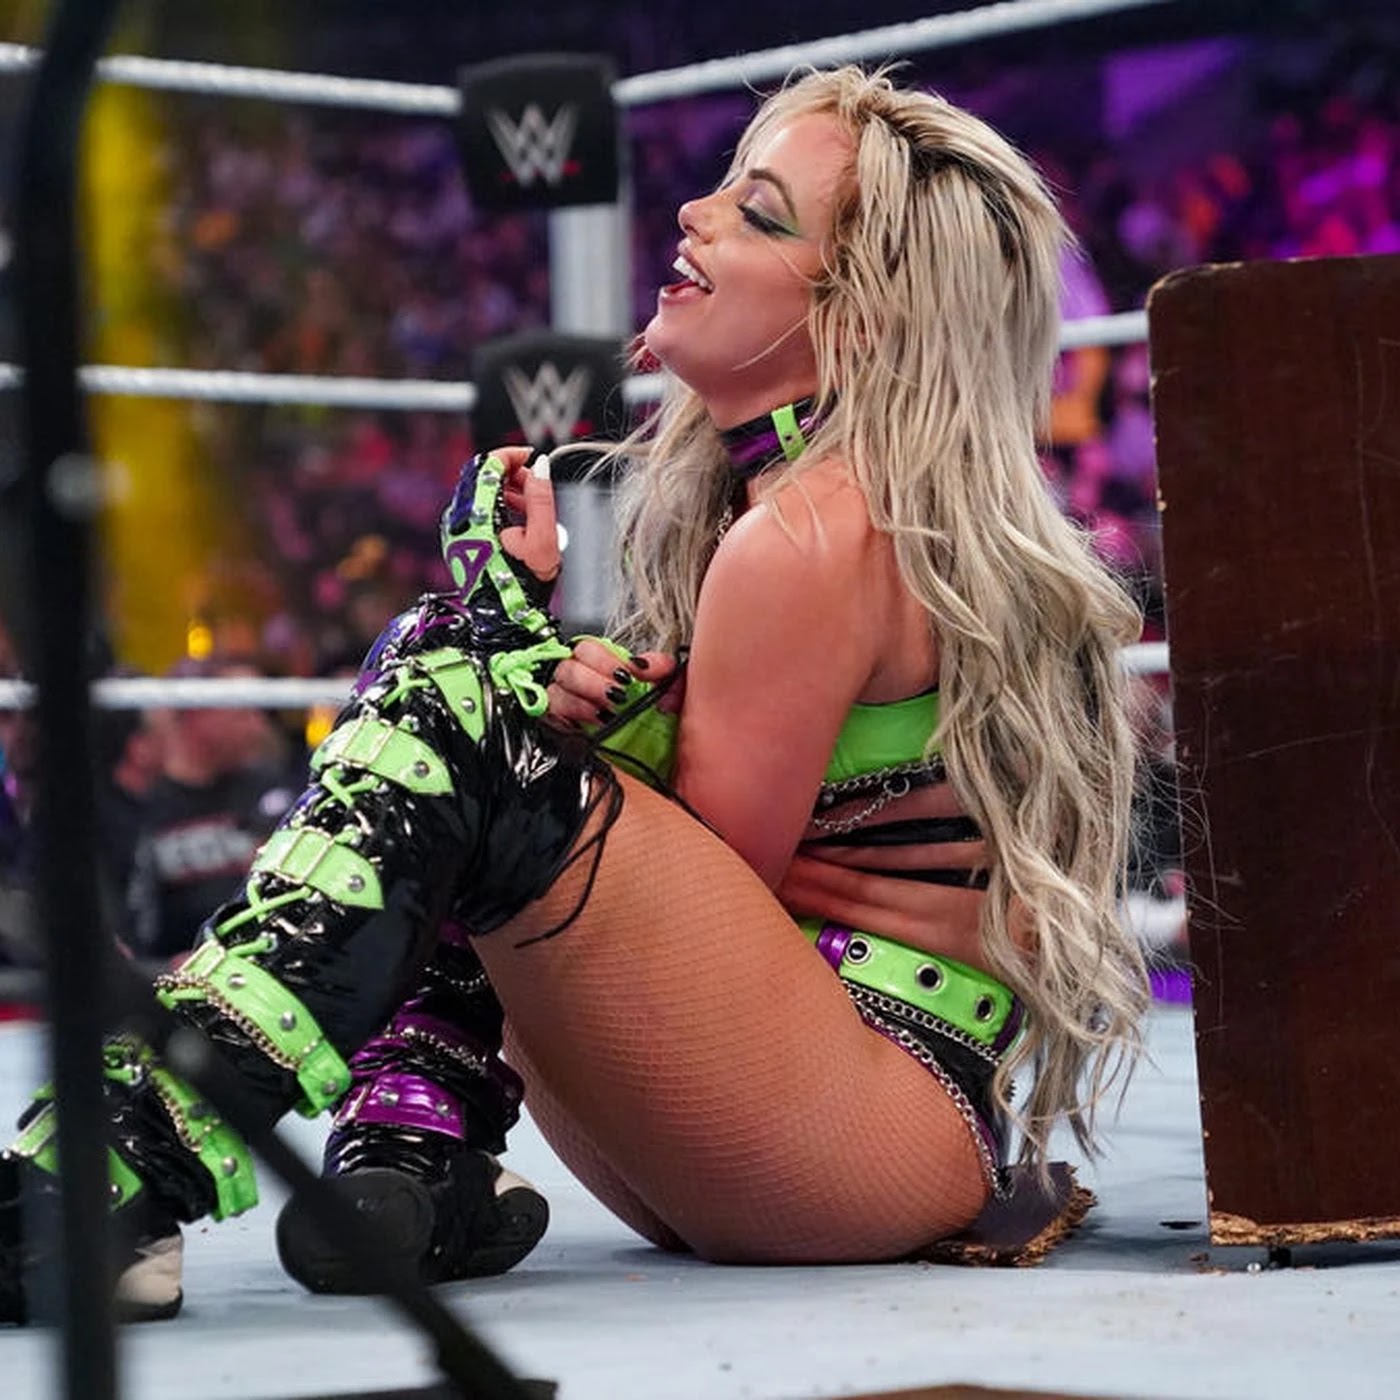 "But damn it's hot"- Twitter erupts after Liv Morgan brutalizes former WWE authority figure on SmackDown